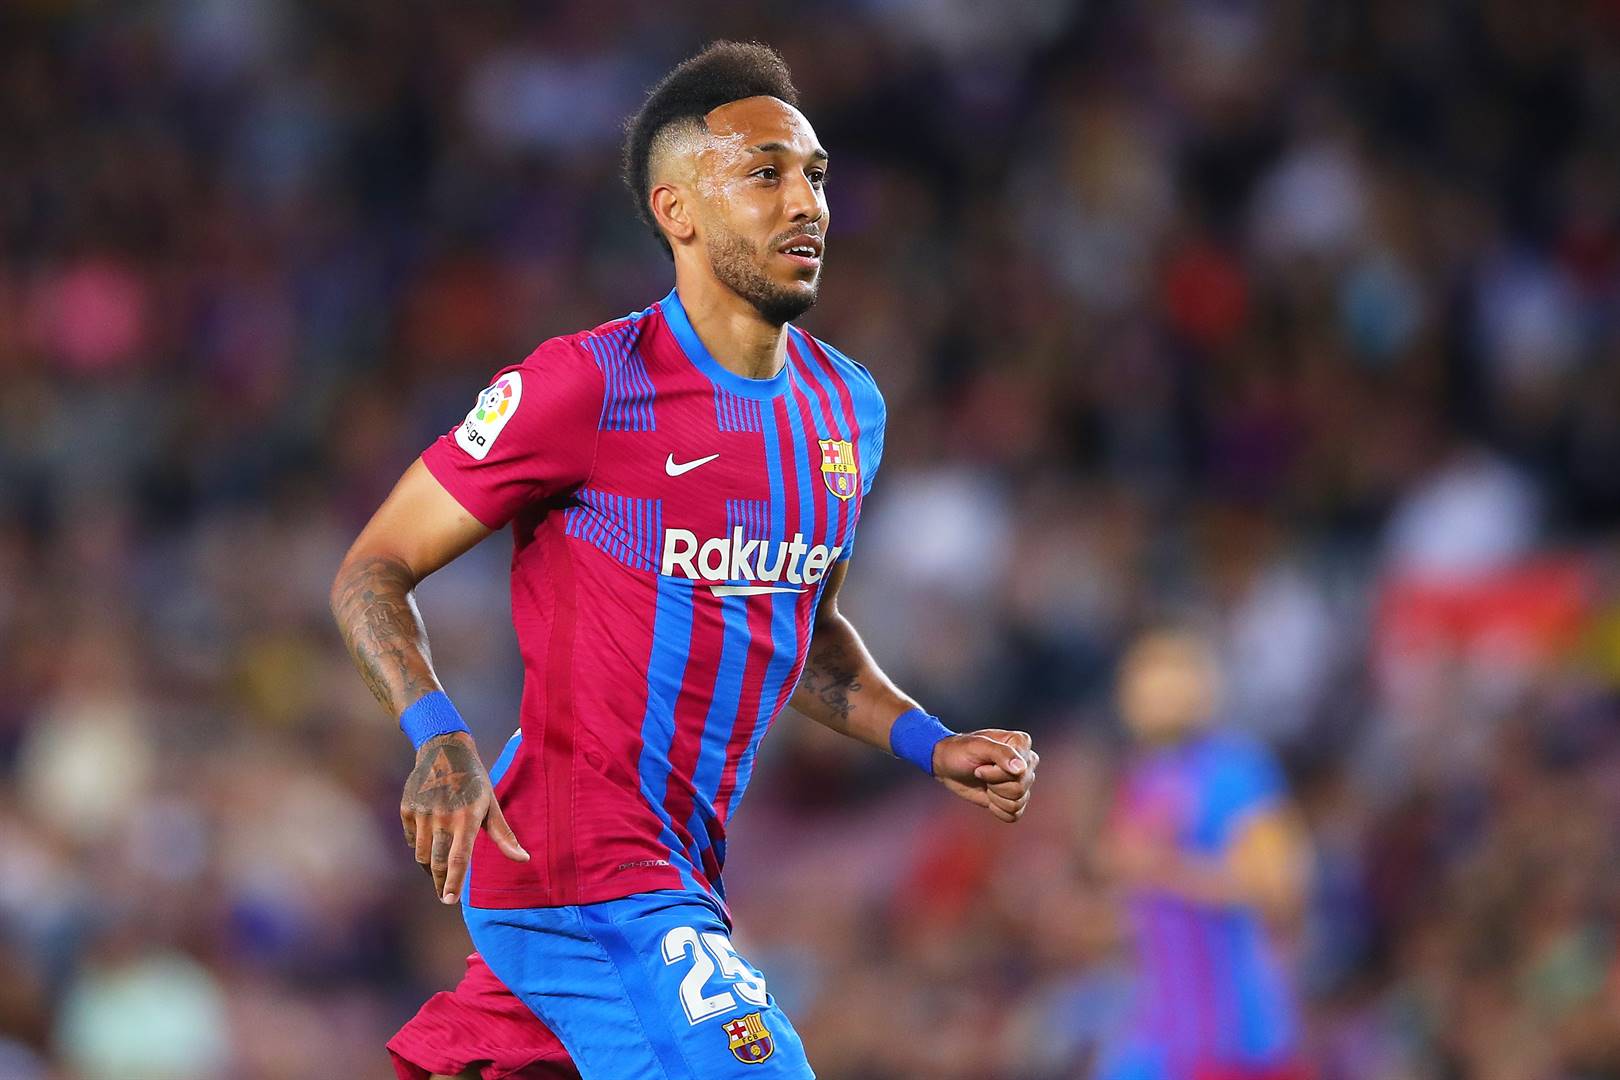 Pierre-Emerick Aubameyang has lit up the second half of the LaLiga season since his loan move from Arsenal in January. Photo: Eric Alonso / Getty Images